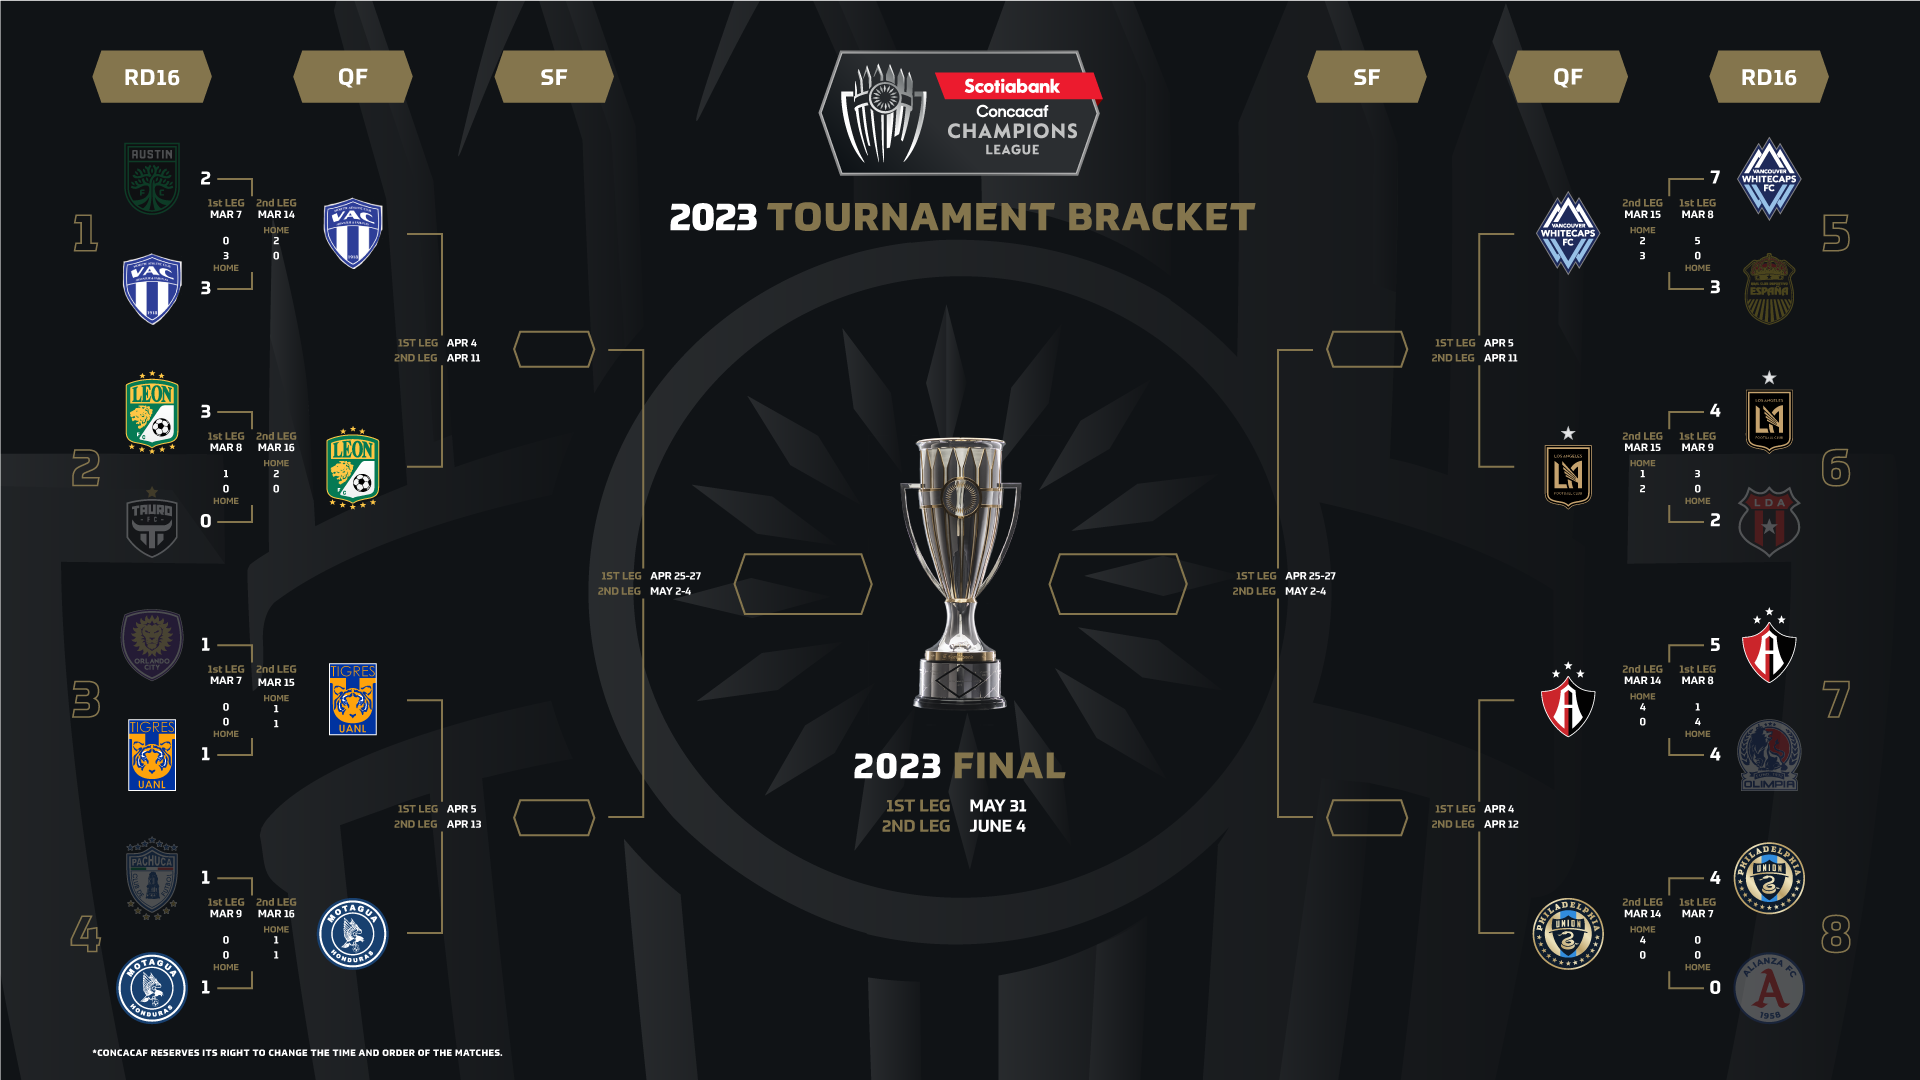 Schedule announced for 2023 Scotiabank Concacaf Champions League